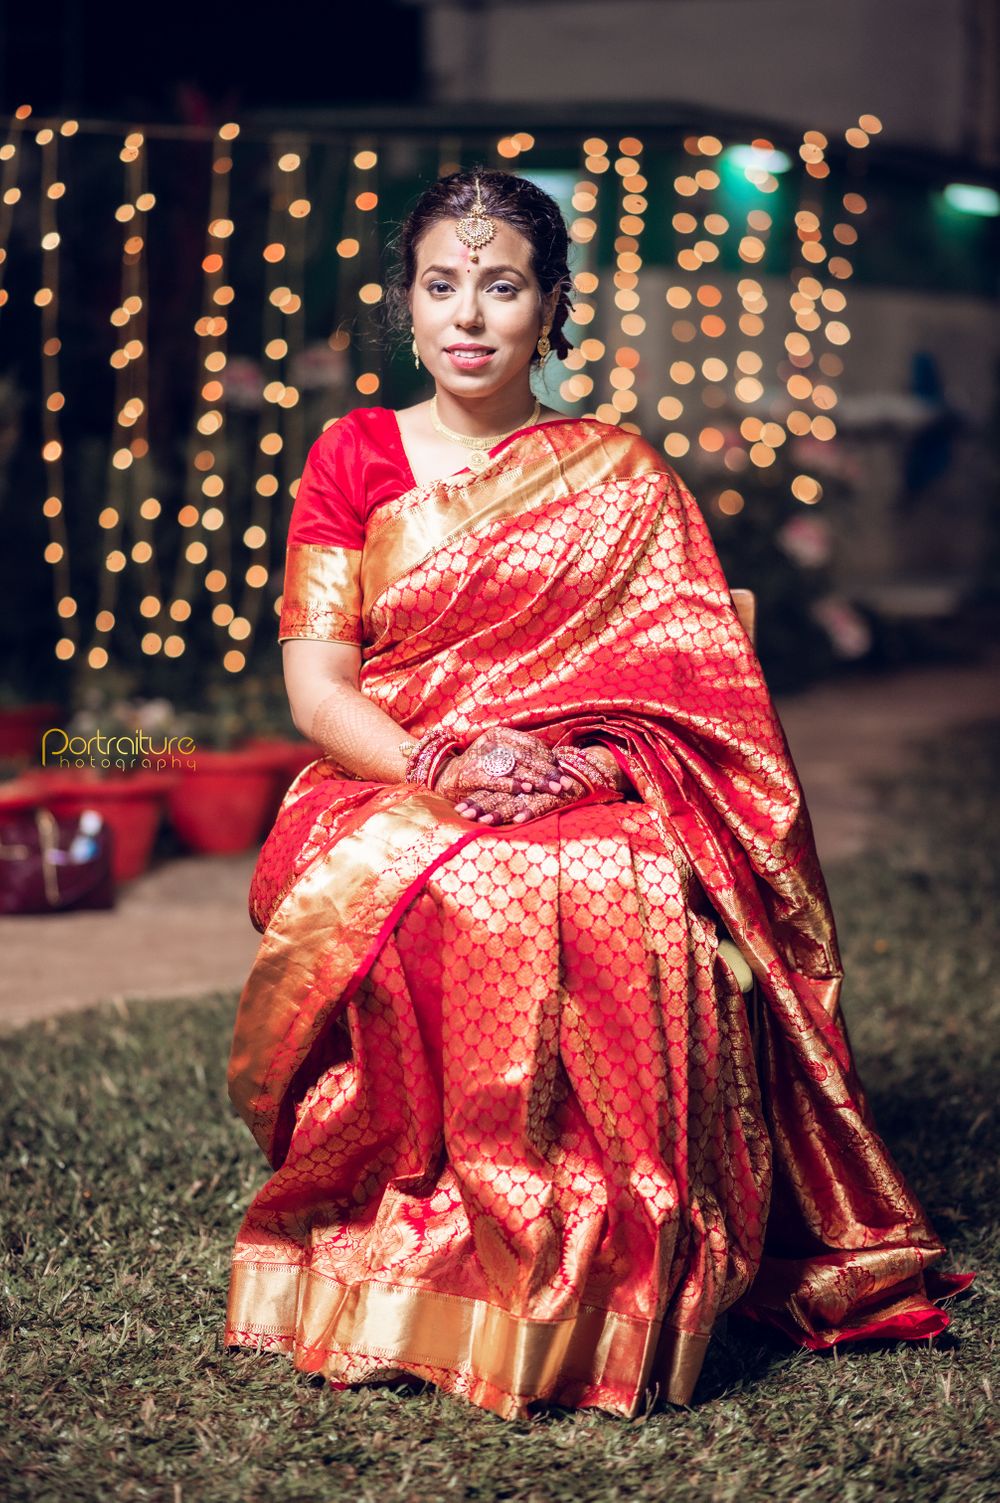 Photo From GUDU & SIMI - By Portraiture Photography